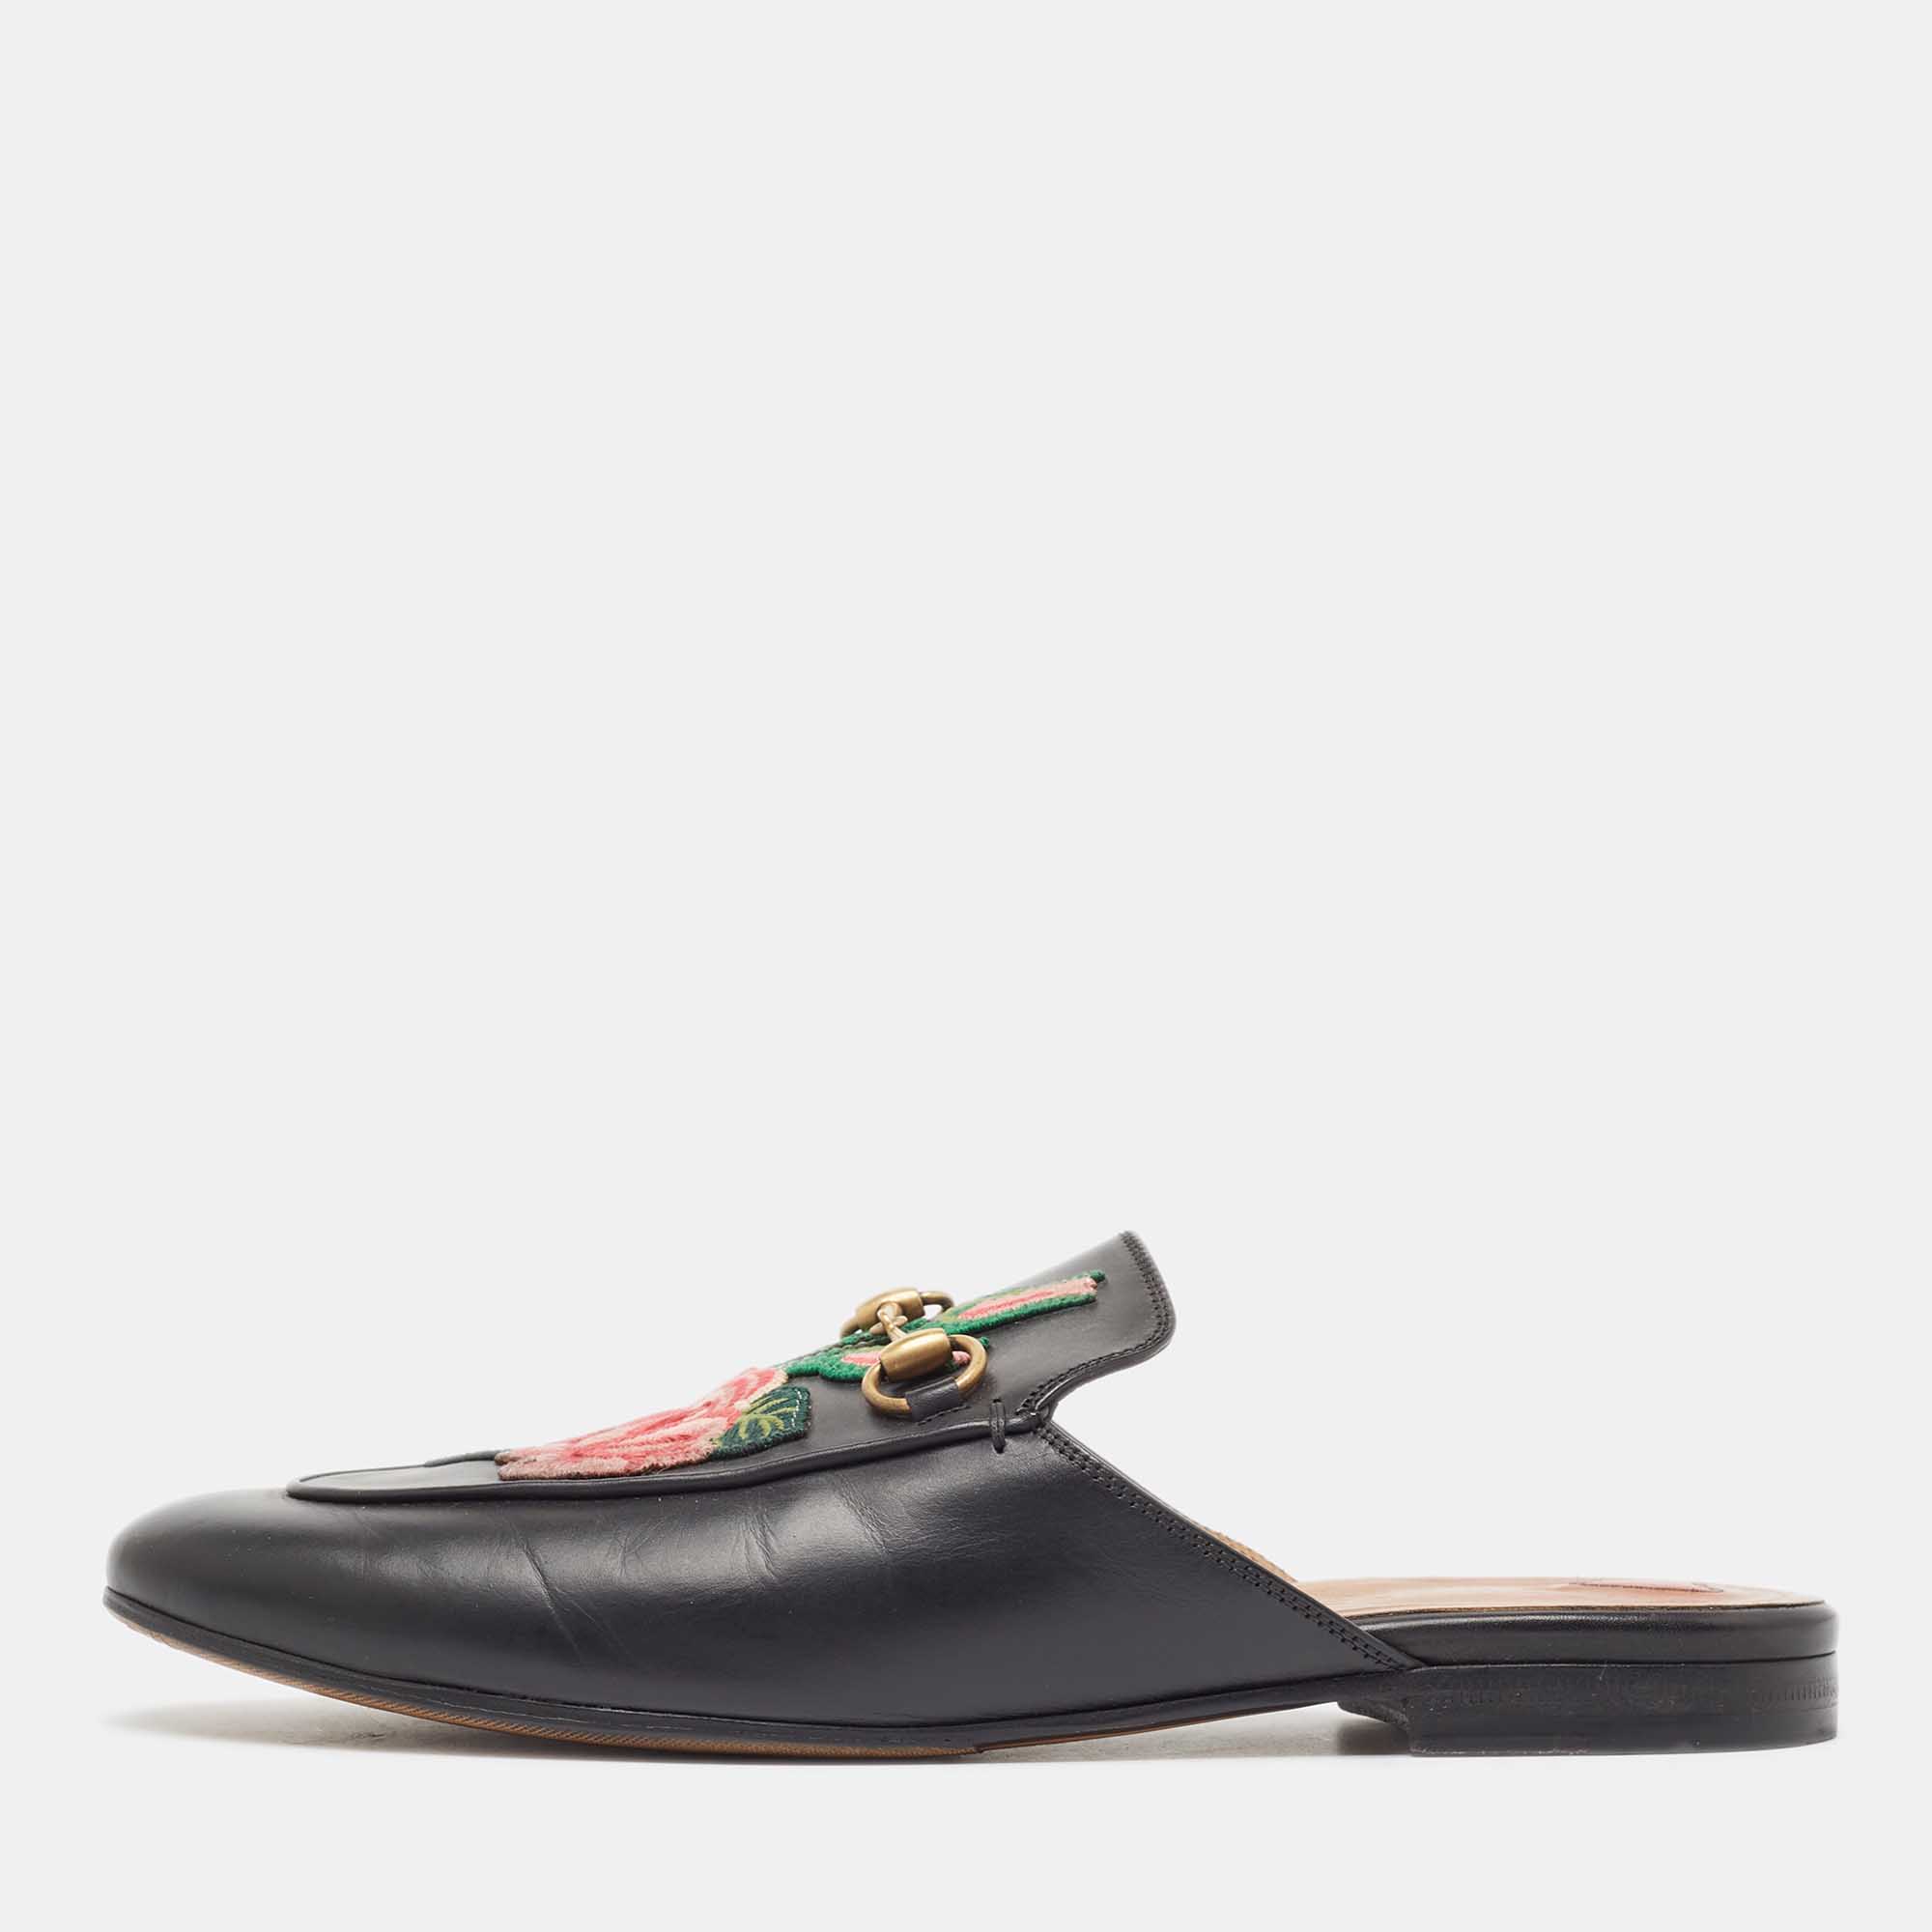 Gucci black leather rose embroidered princetown horsebit flat mules size 39